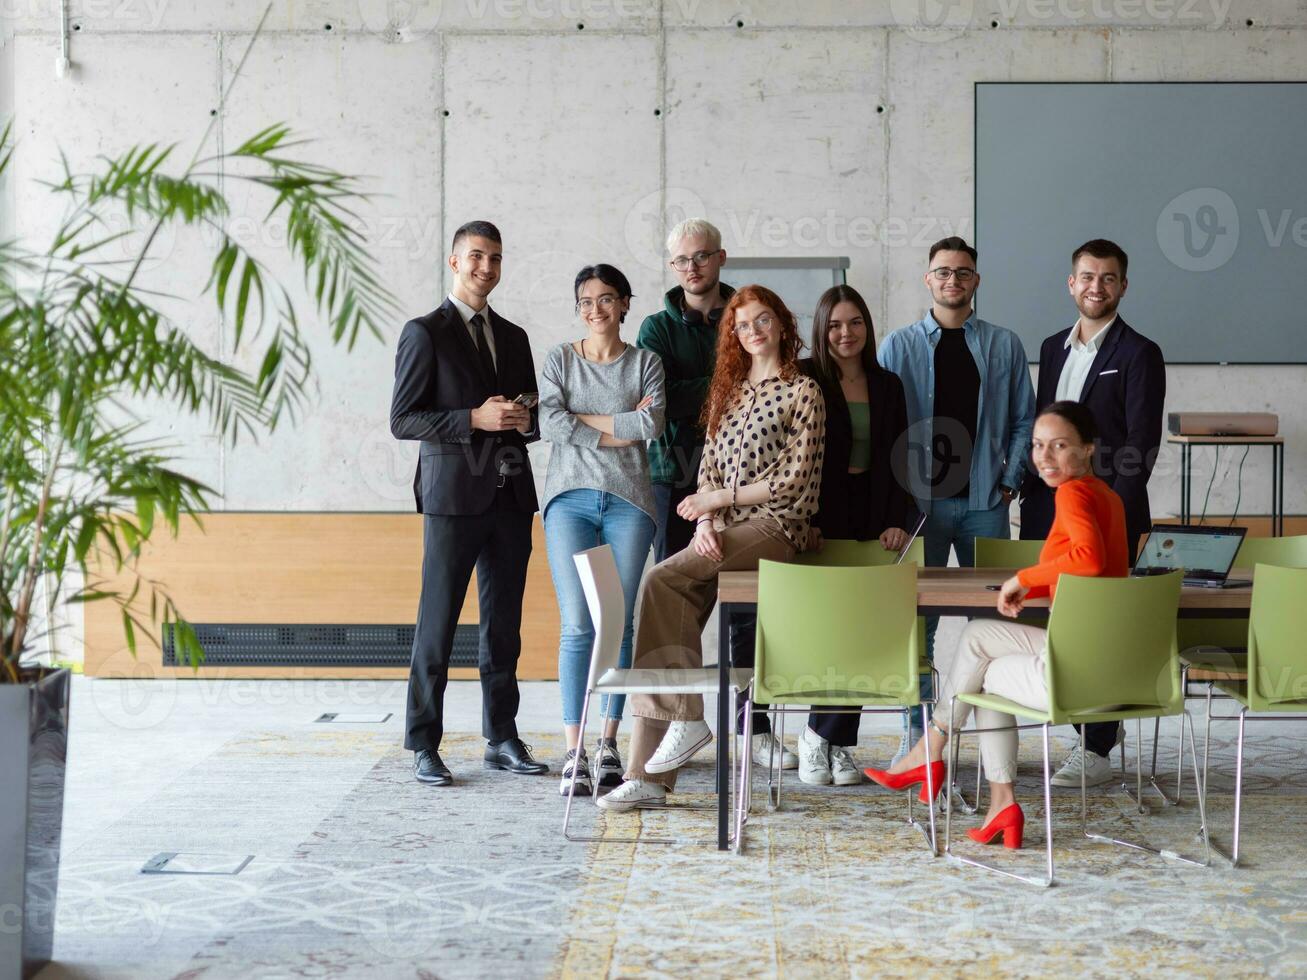 A diverse group of successful businesspeople gather and pose for a photo, showcasing teamwork and professional empowerment in a modern office setting. photo